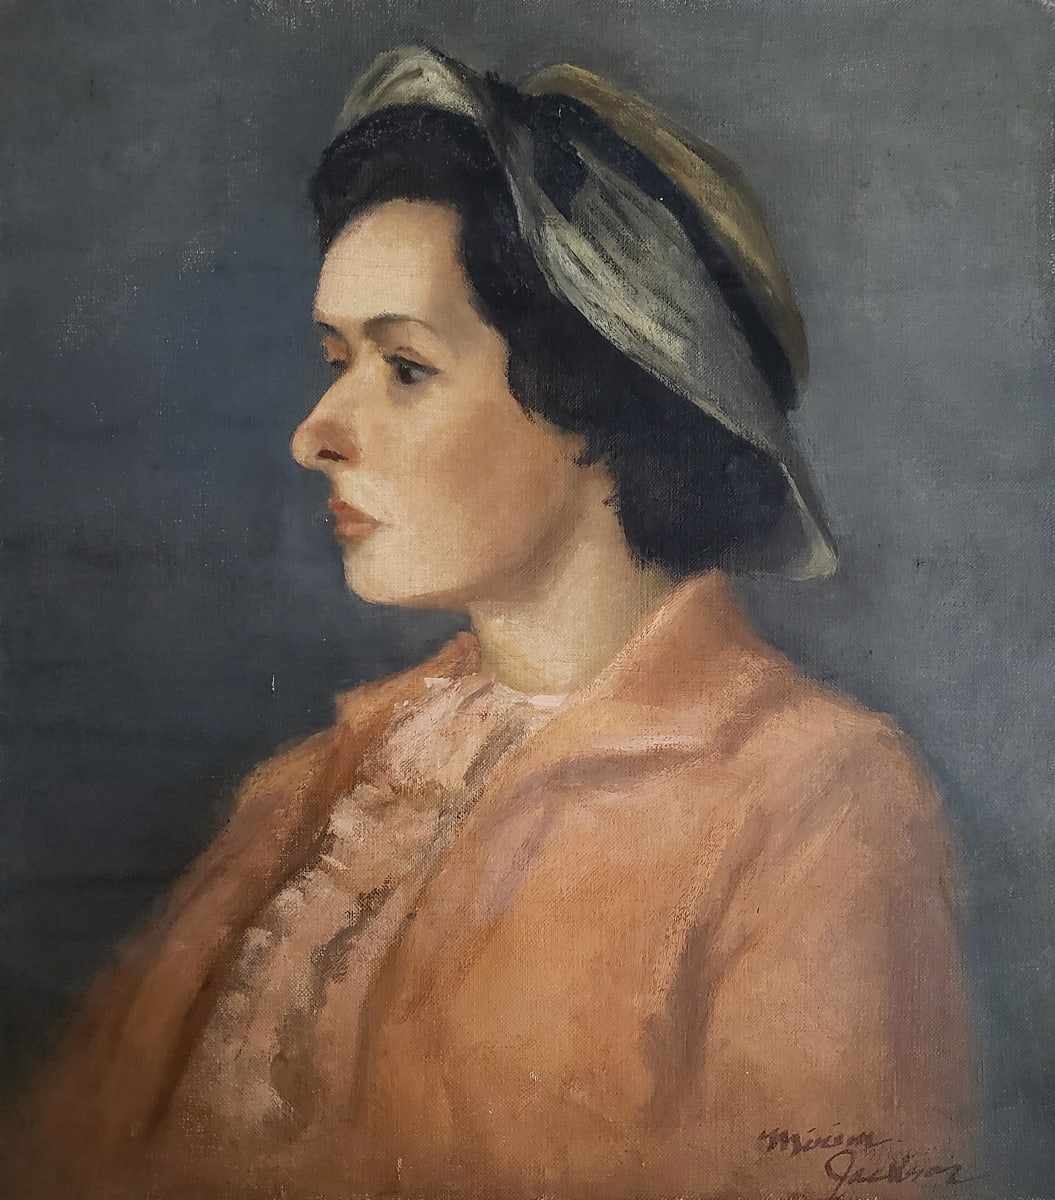 Woman in the Orange Jacket and Hat by Miriam McClung  Image: "Woman in the Orange Jacket and Hat" by Miriam McClung, 1963. Oil on linen.